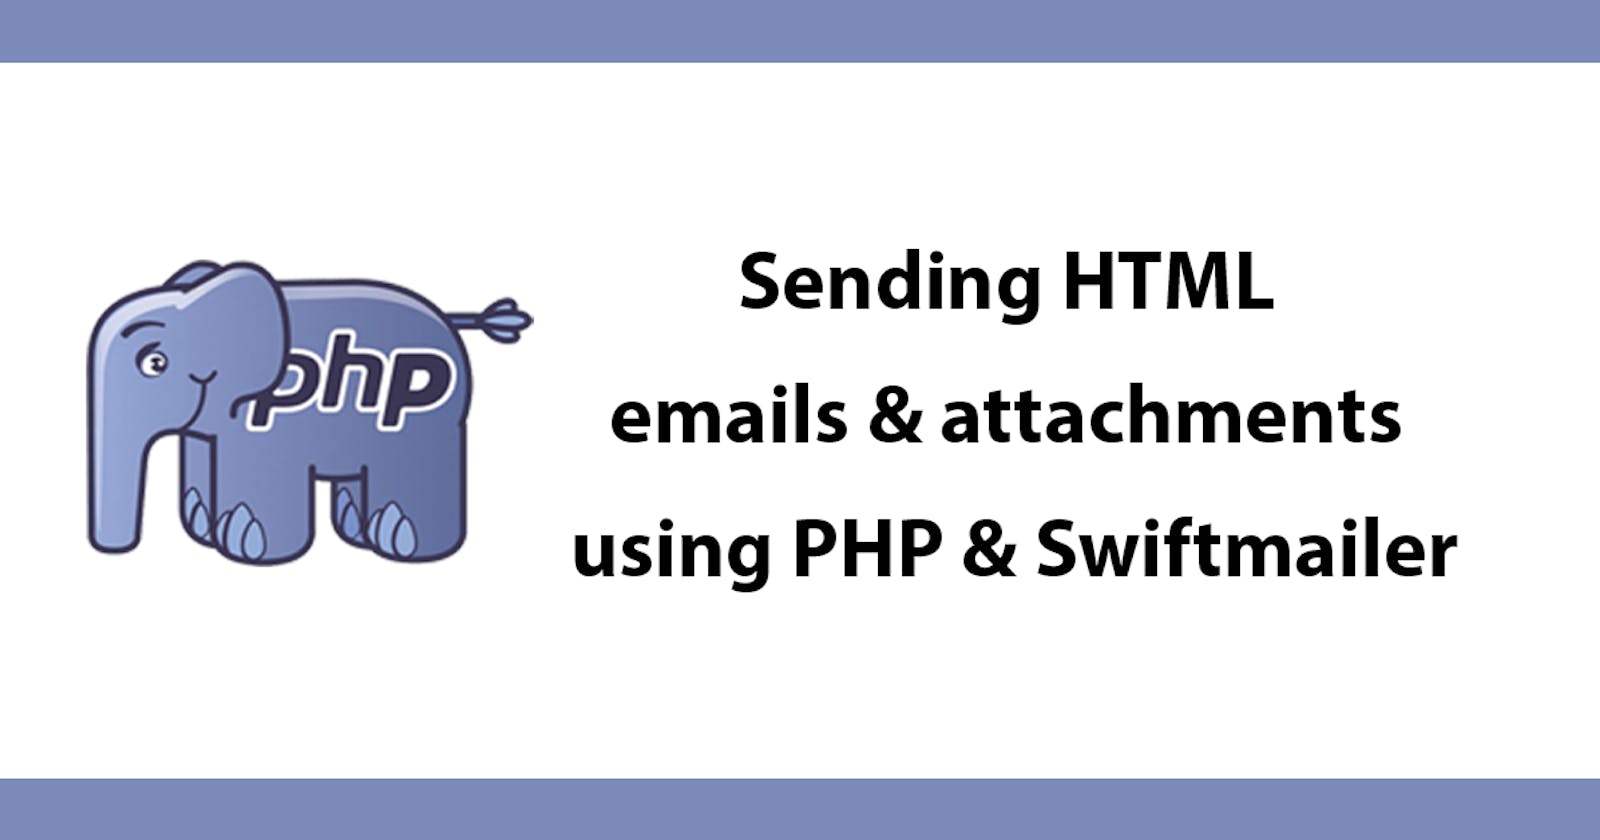 Sending HTML emails & attachments using PHP & Swiftmailer